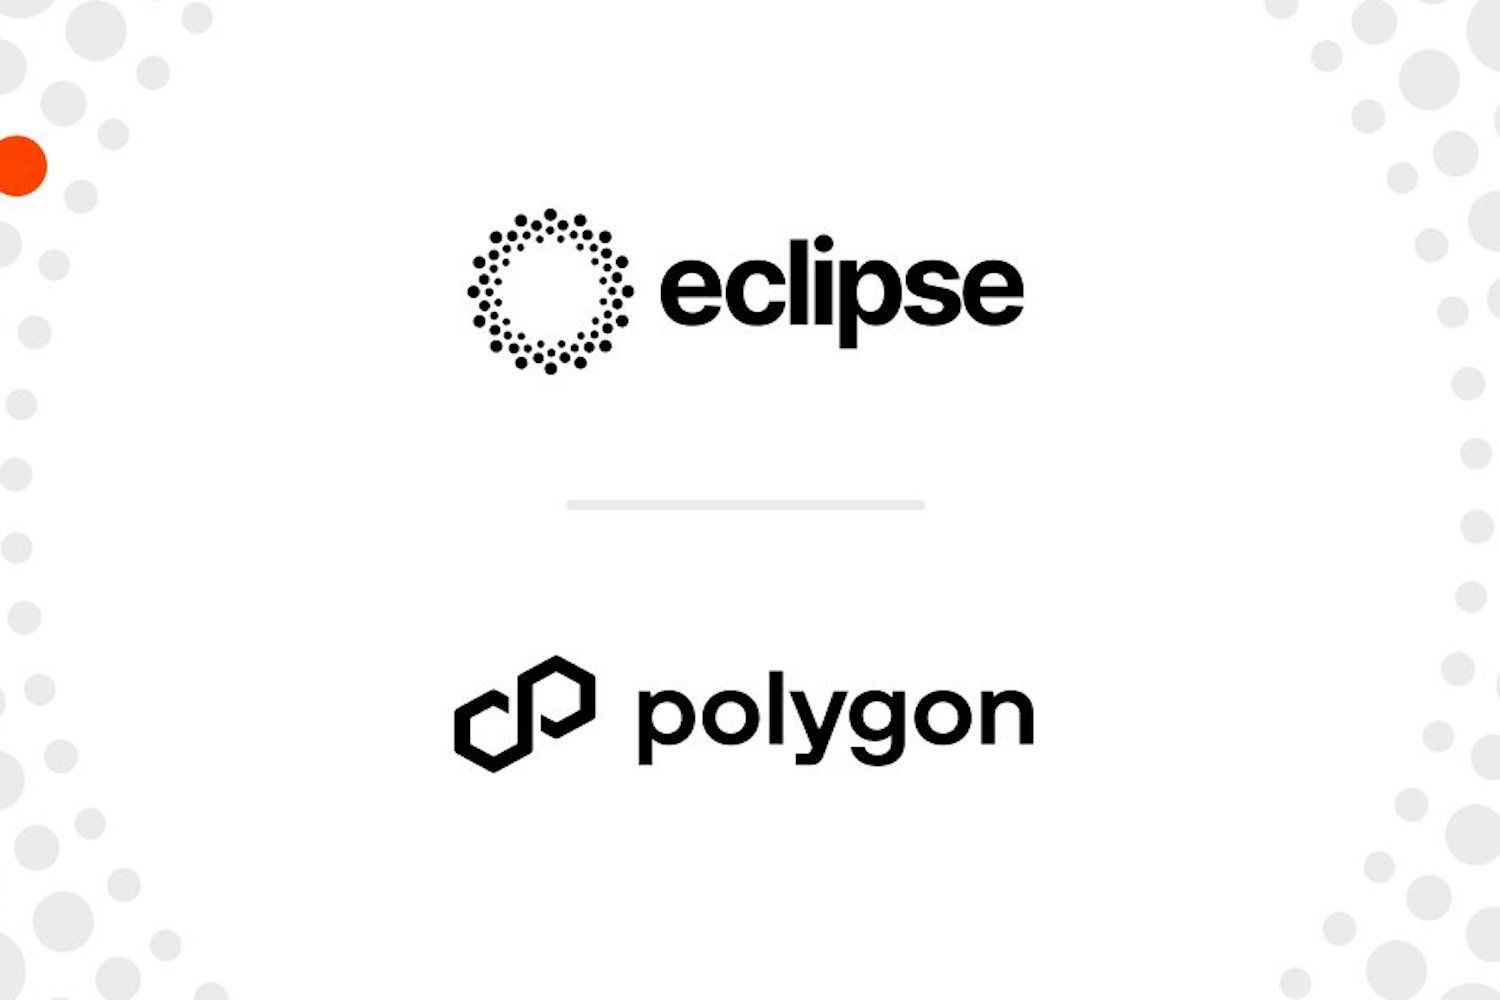 Polygon Partners with Eclipse for Solana-based Rollups